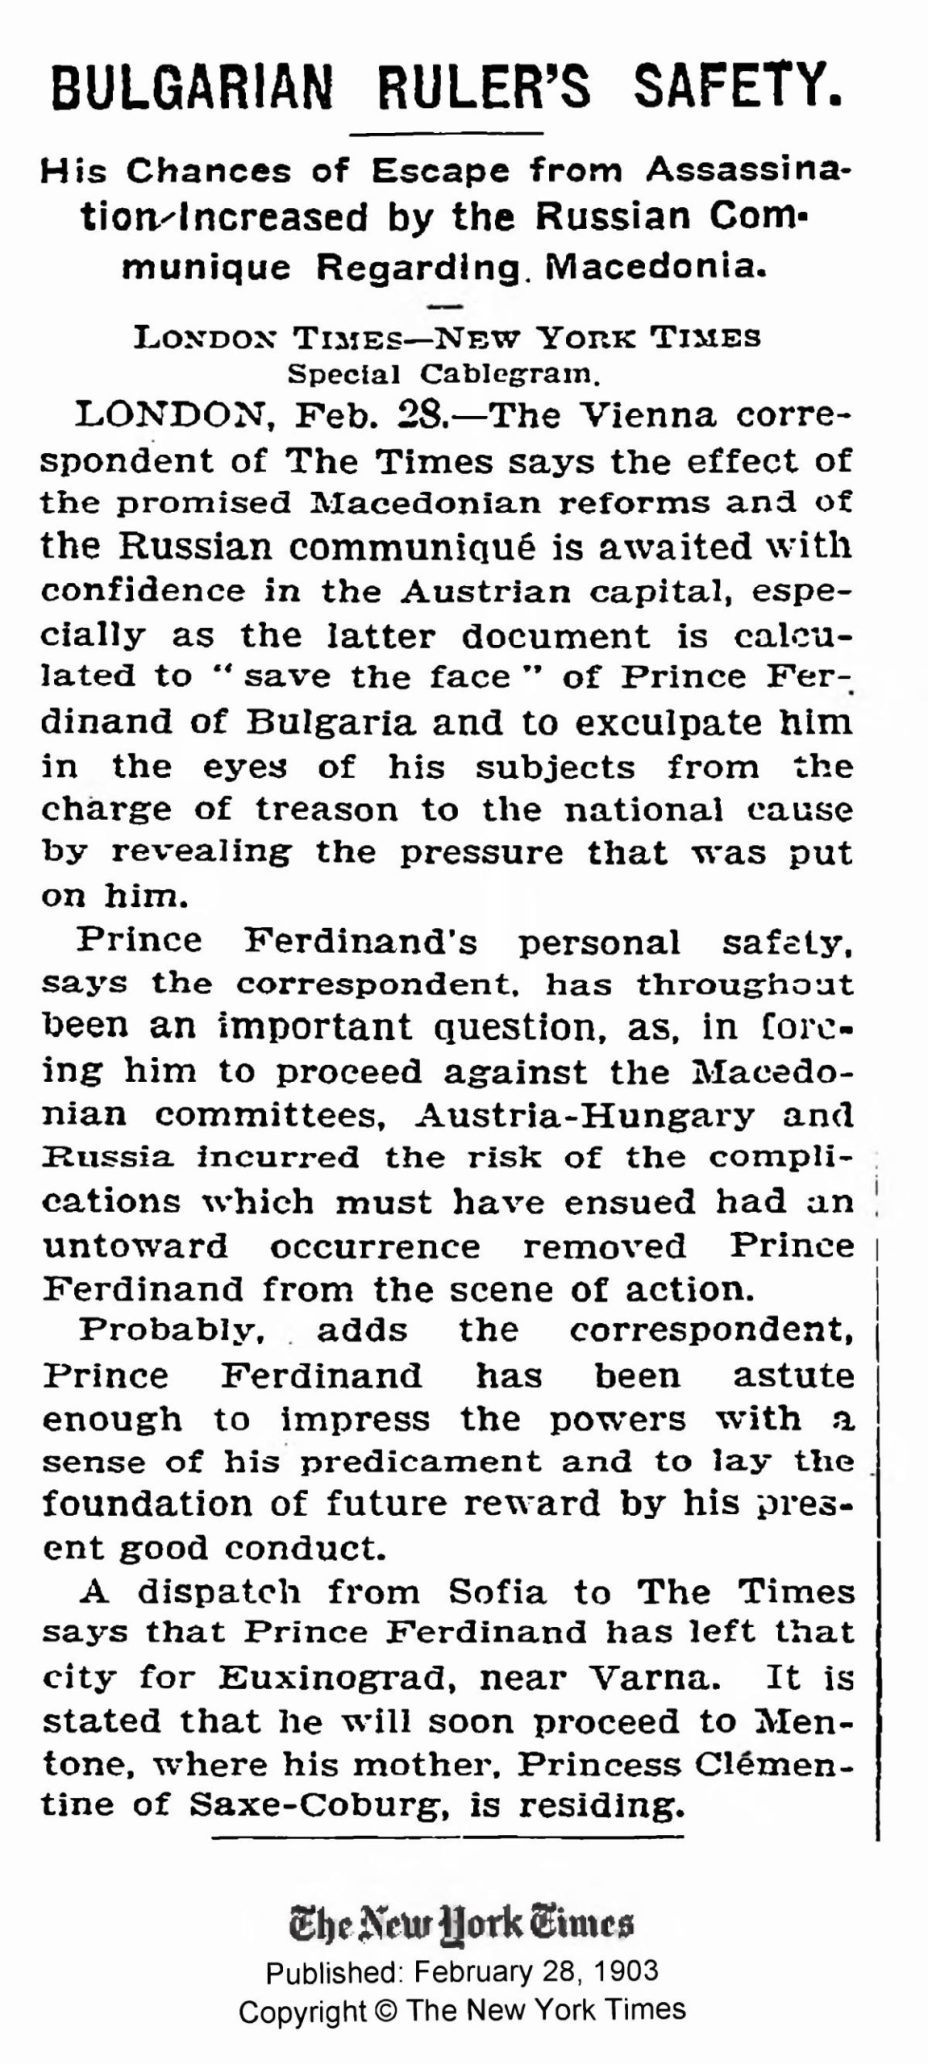 1903.02.28_The New York Times - Ferdinand against Macedonians